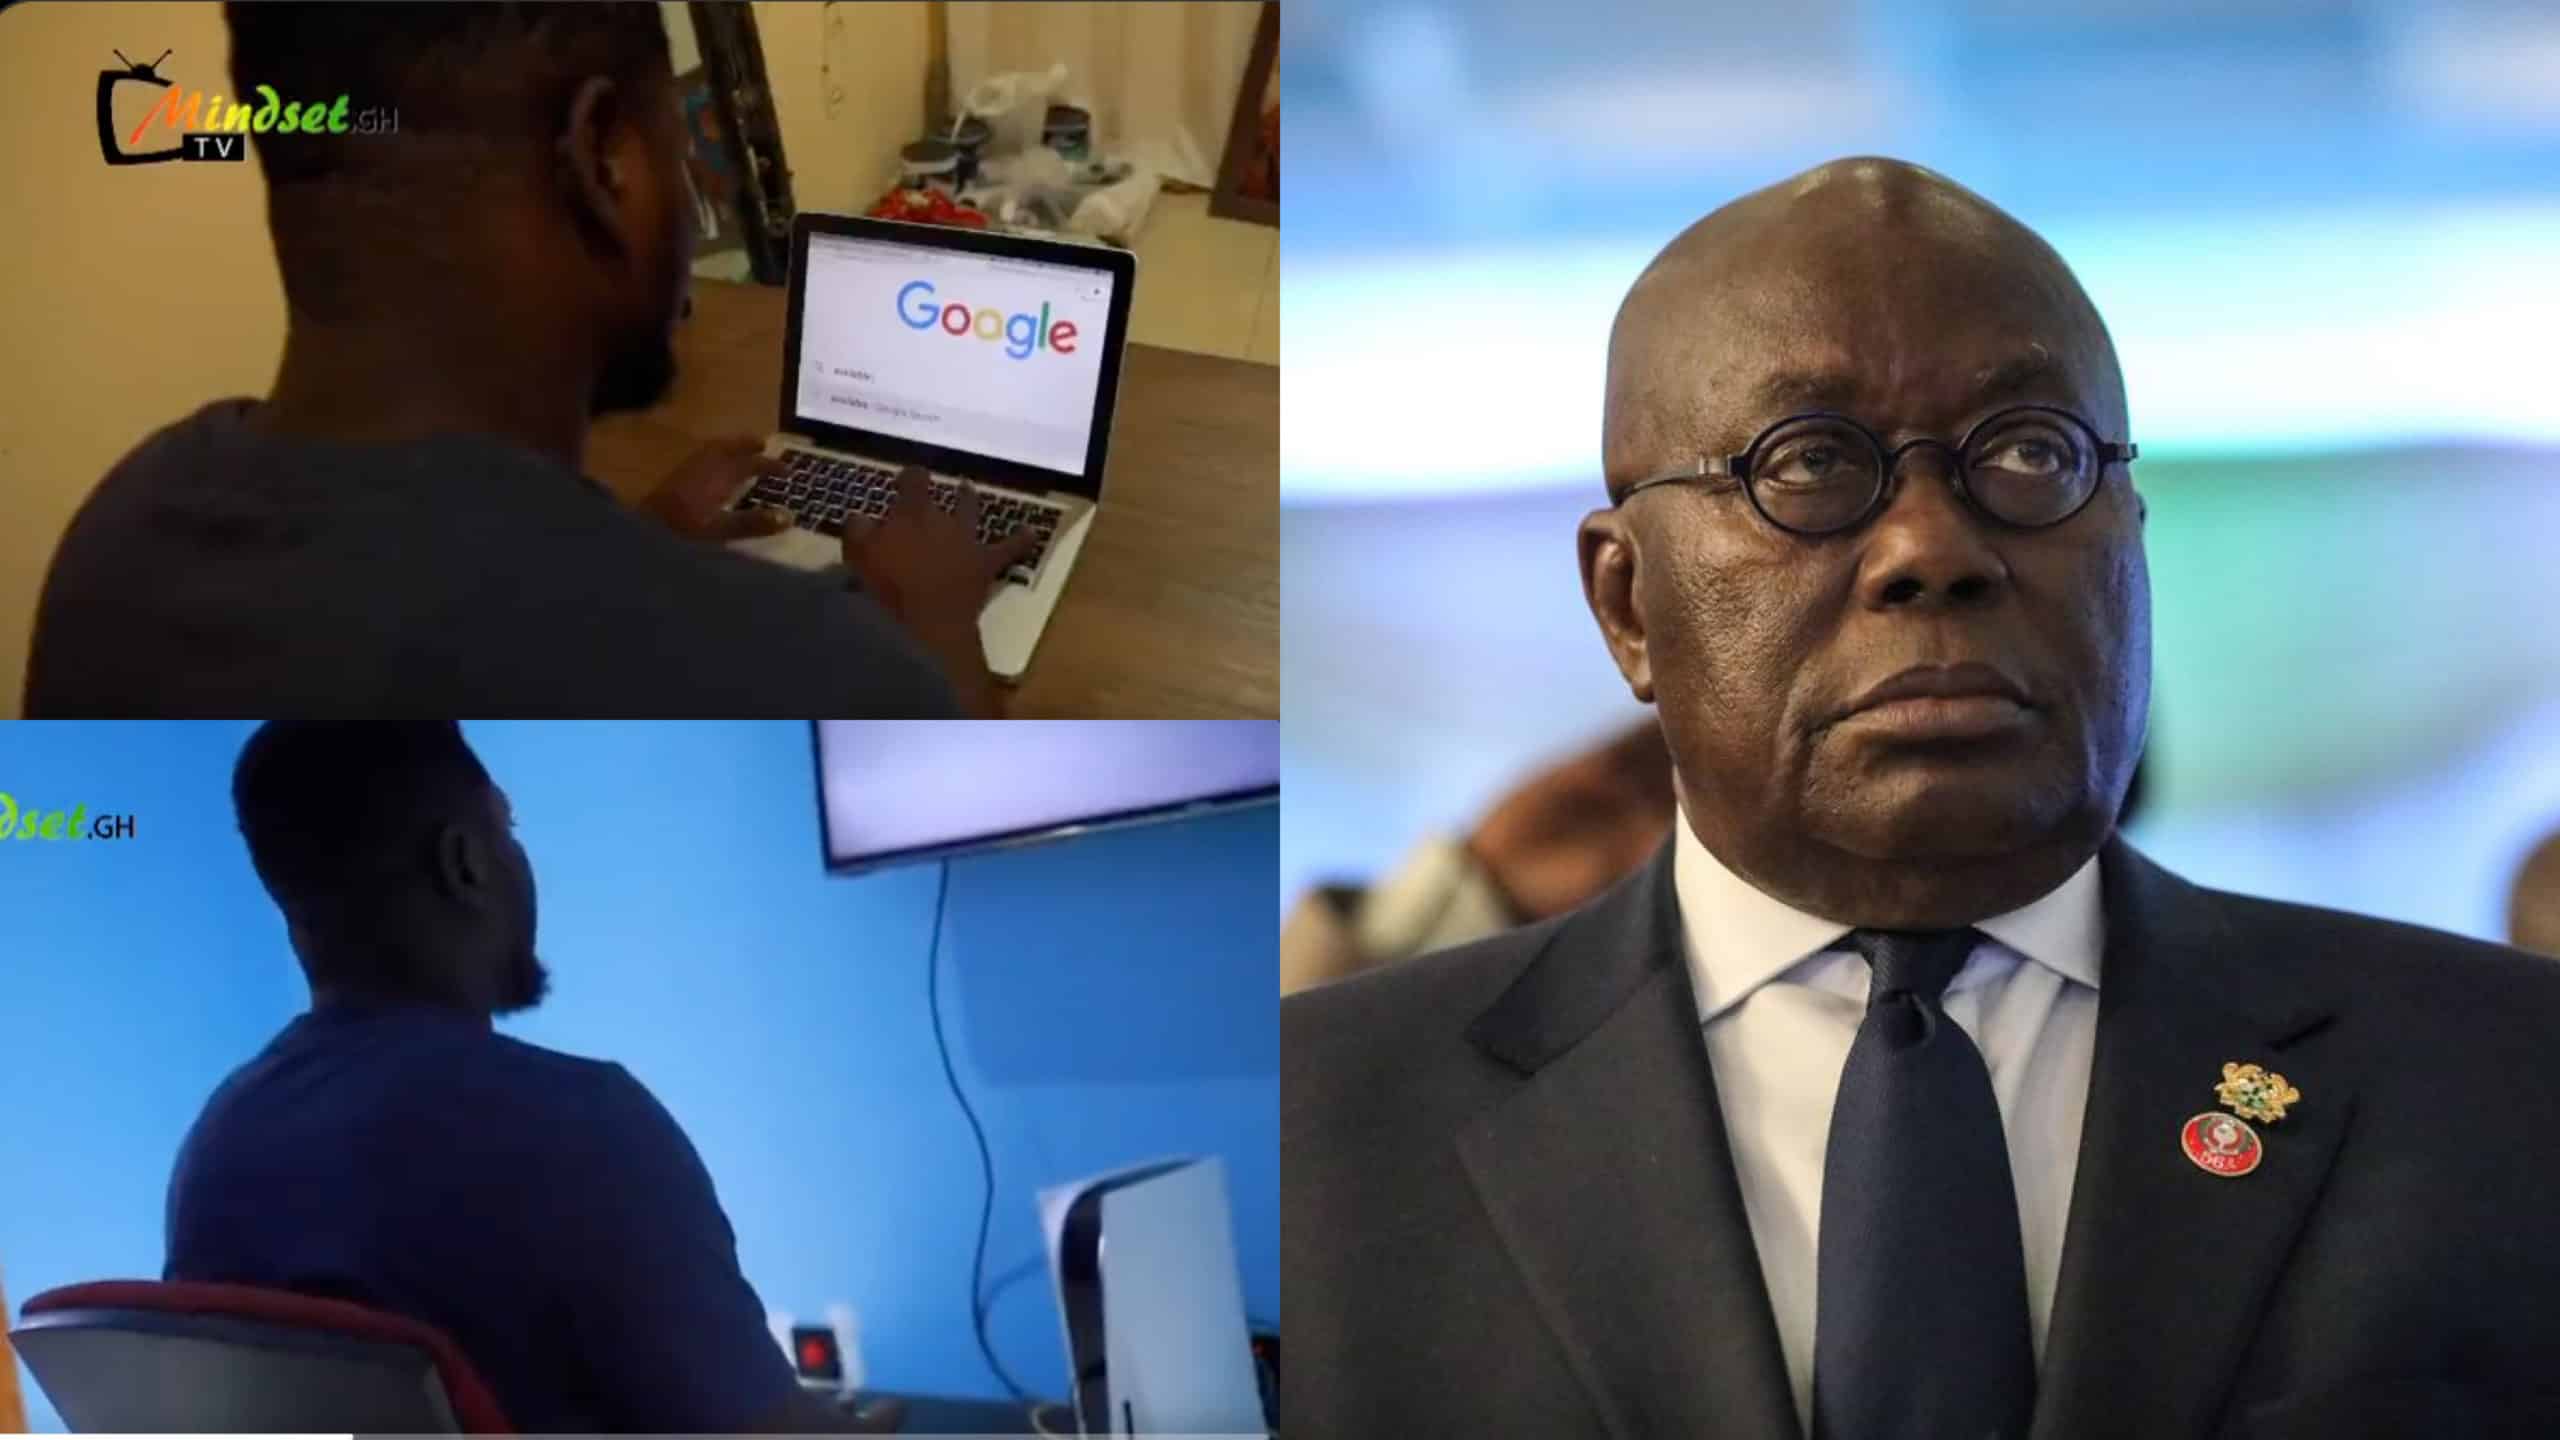 "Sell the MacBook and PS5 to set up a business" - Ghanaians react angrily to E-LEVY video ad shared by Nana Addo